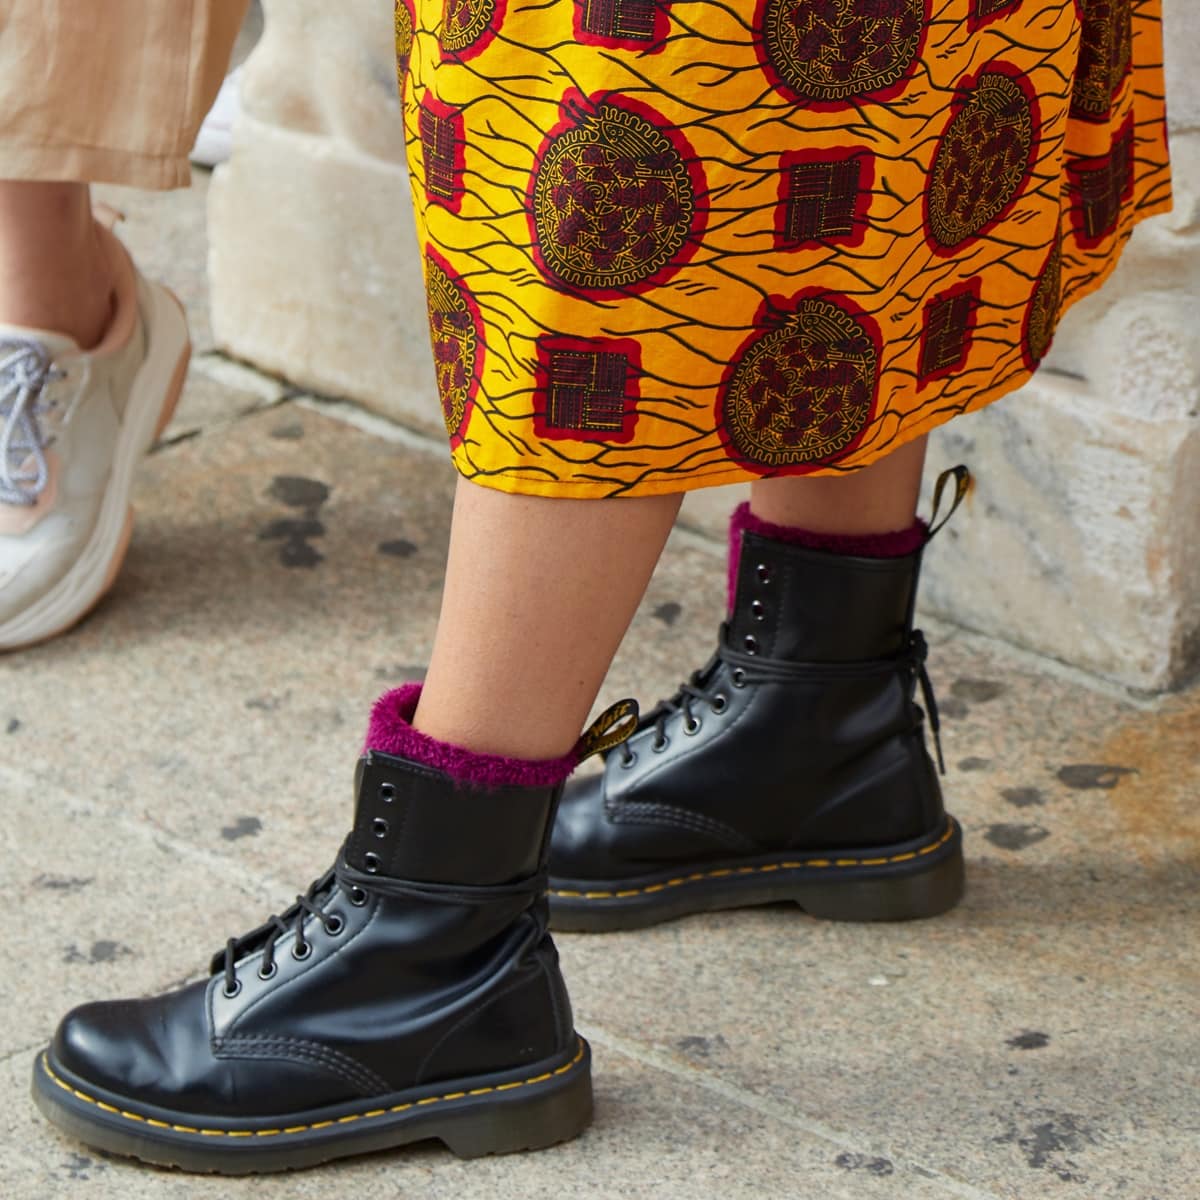 Wear the thickest sock you have when trying out your new Dr. Martens boots for the first time